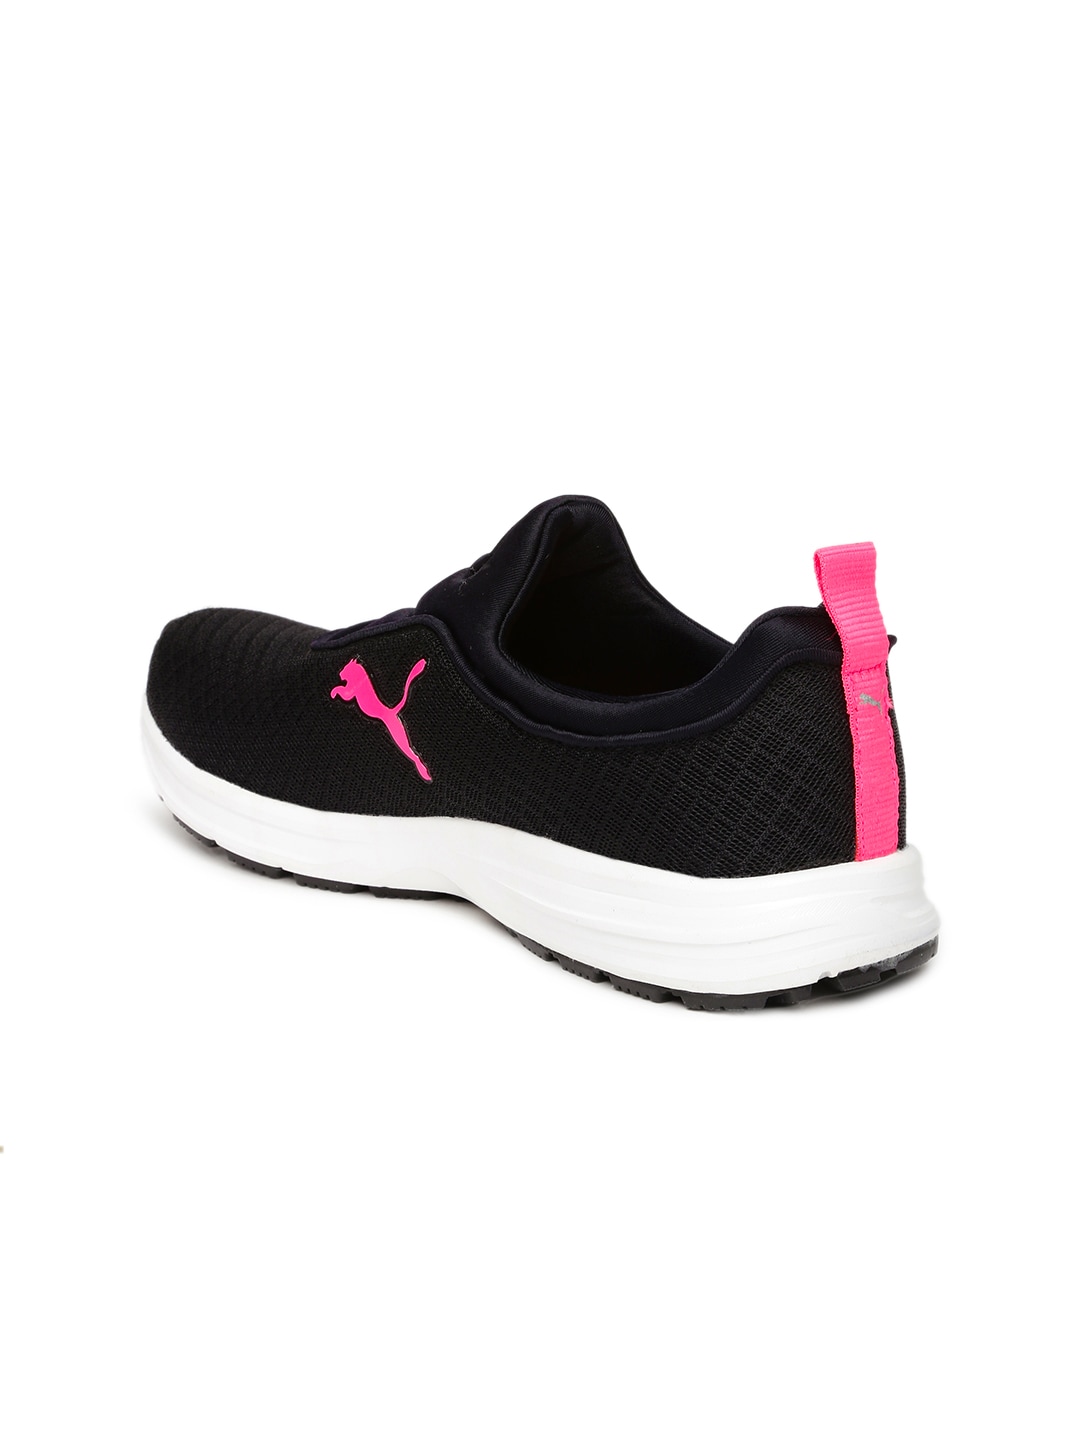 puma sneakers without laces cheapest 